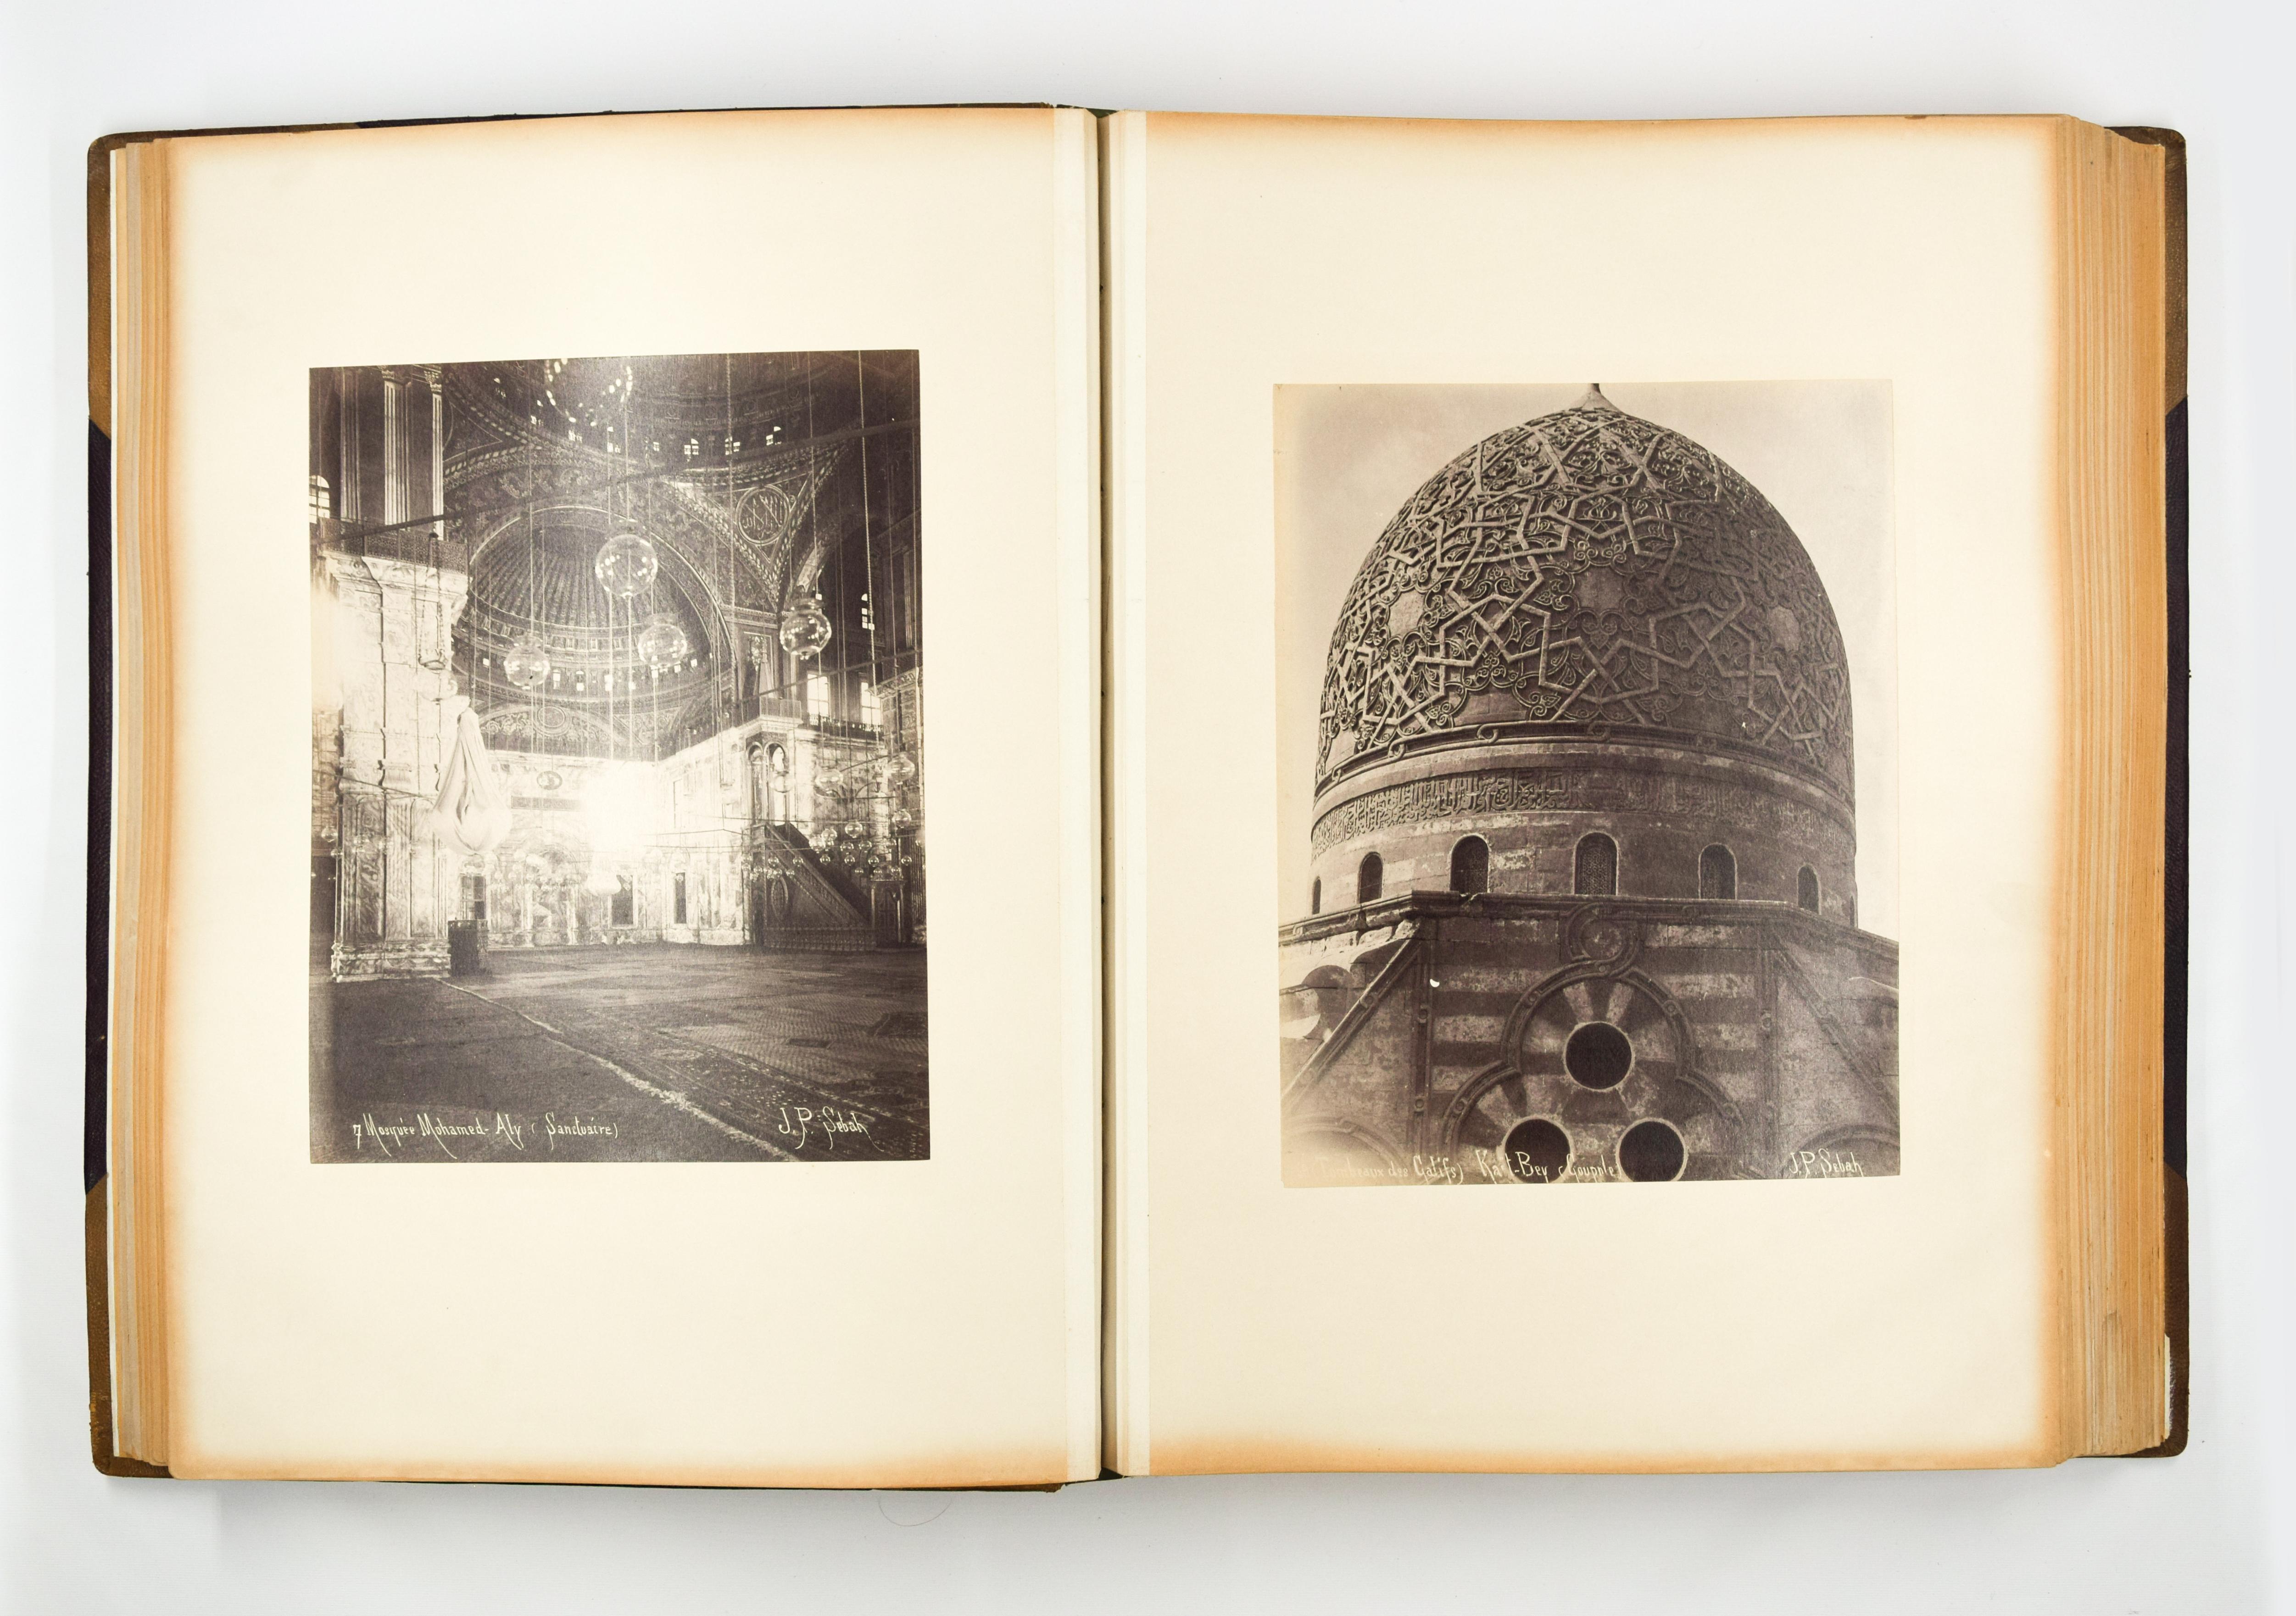 This Precious Orientalist photographic album is a collection of 146 albumen prints, realized by Jean-Pascal Sébah & Antonio Beato between 1880's and 1890's.

As good as new, in an excellent state of conservation: the prints are without color